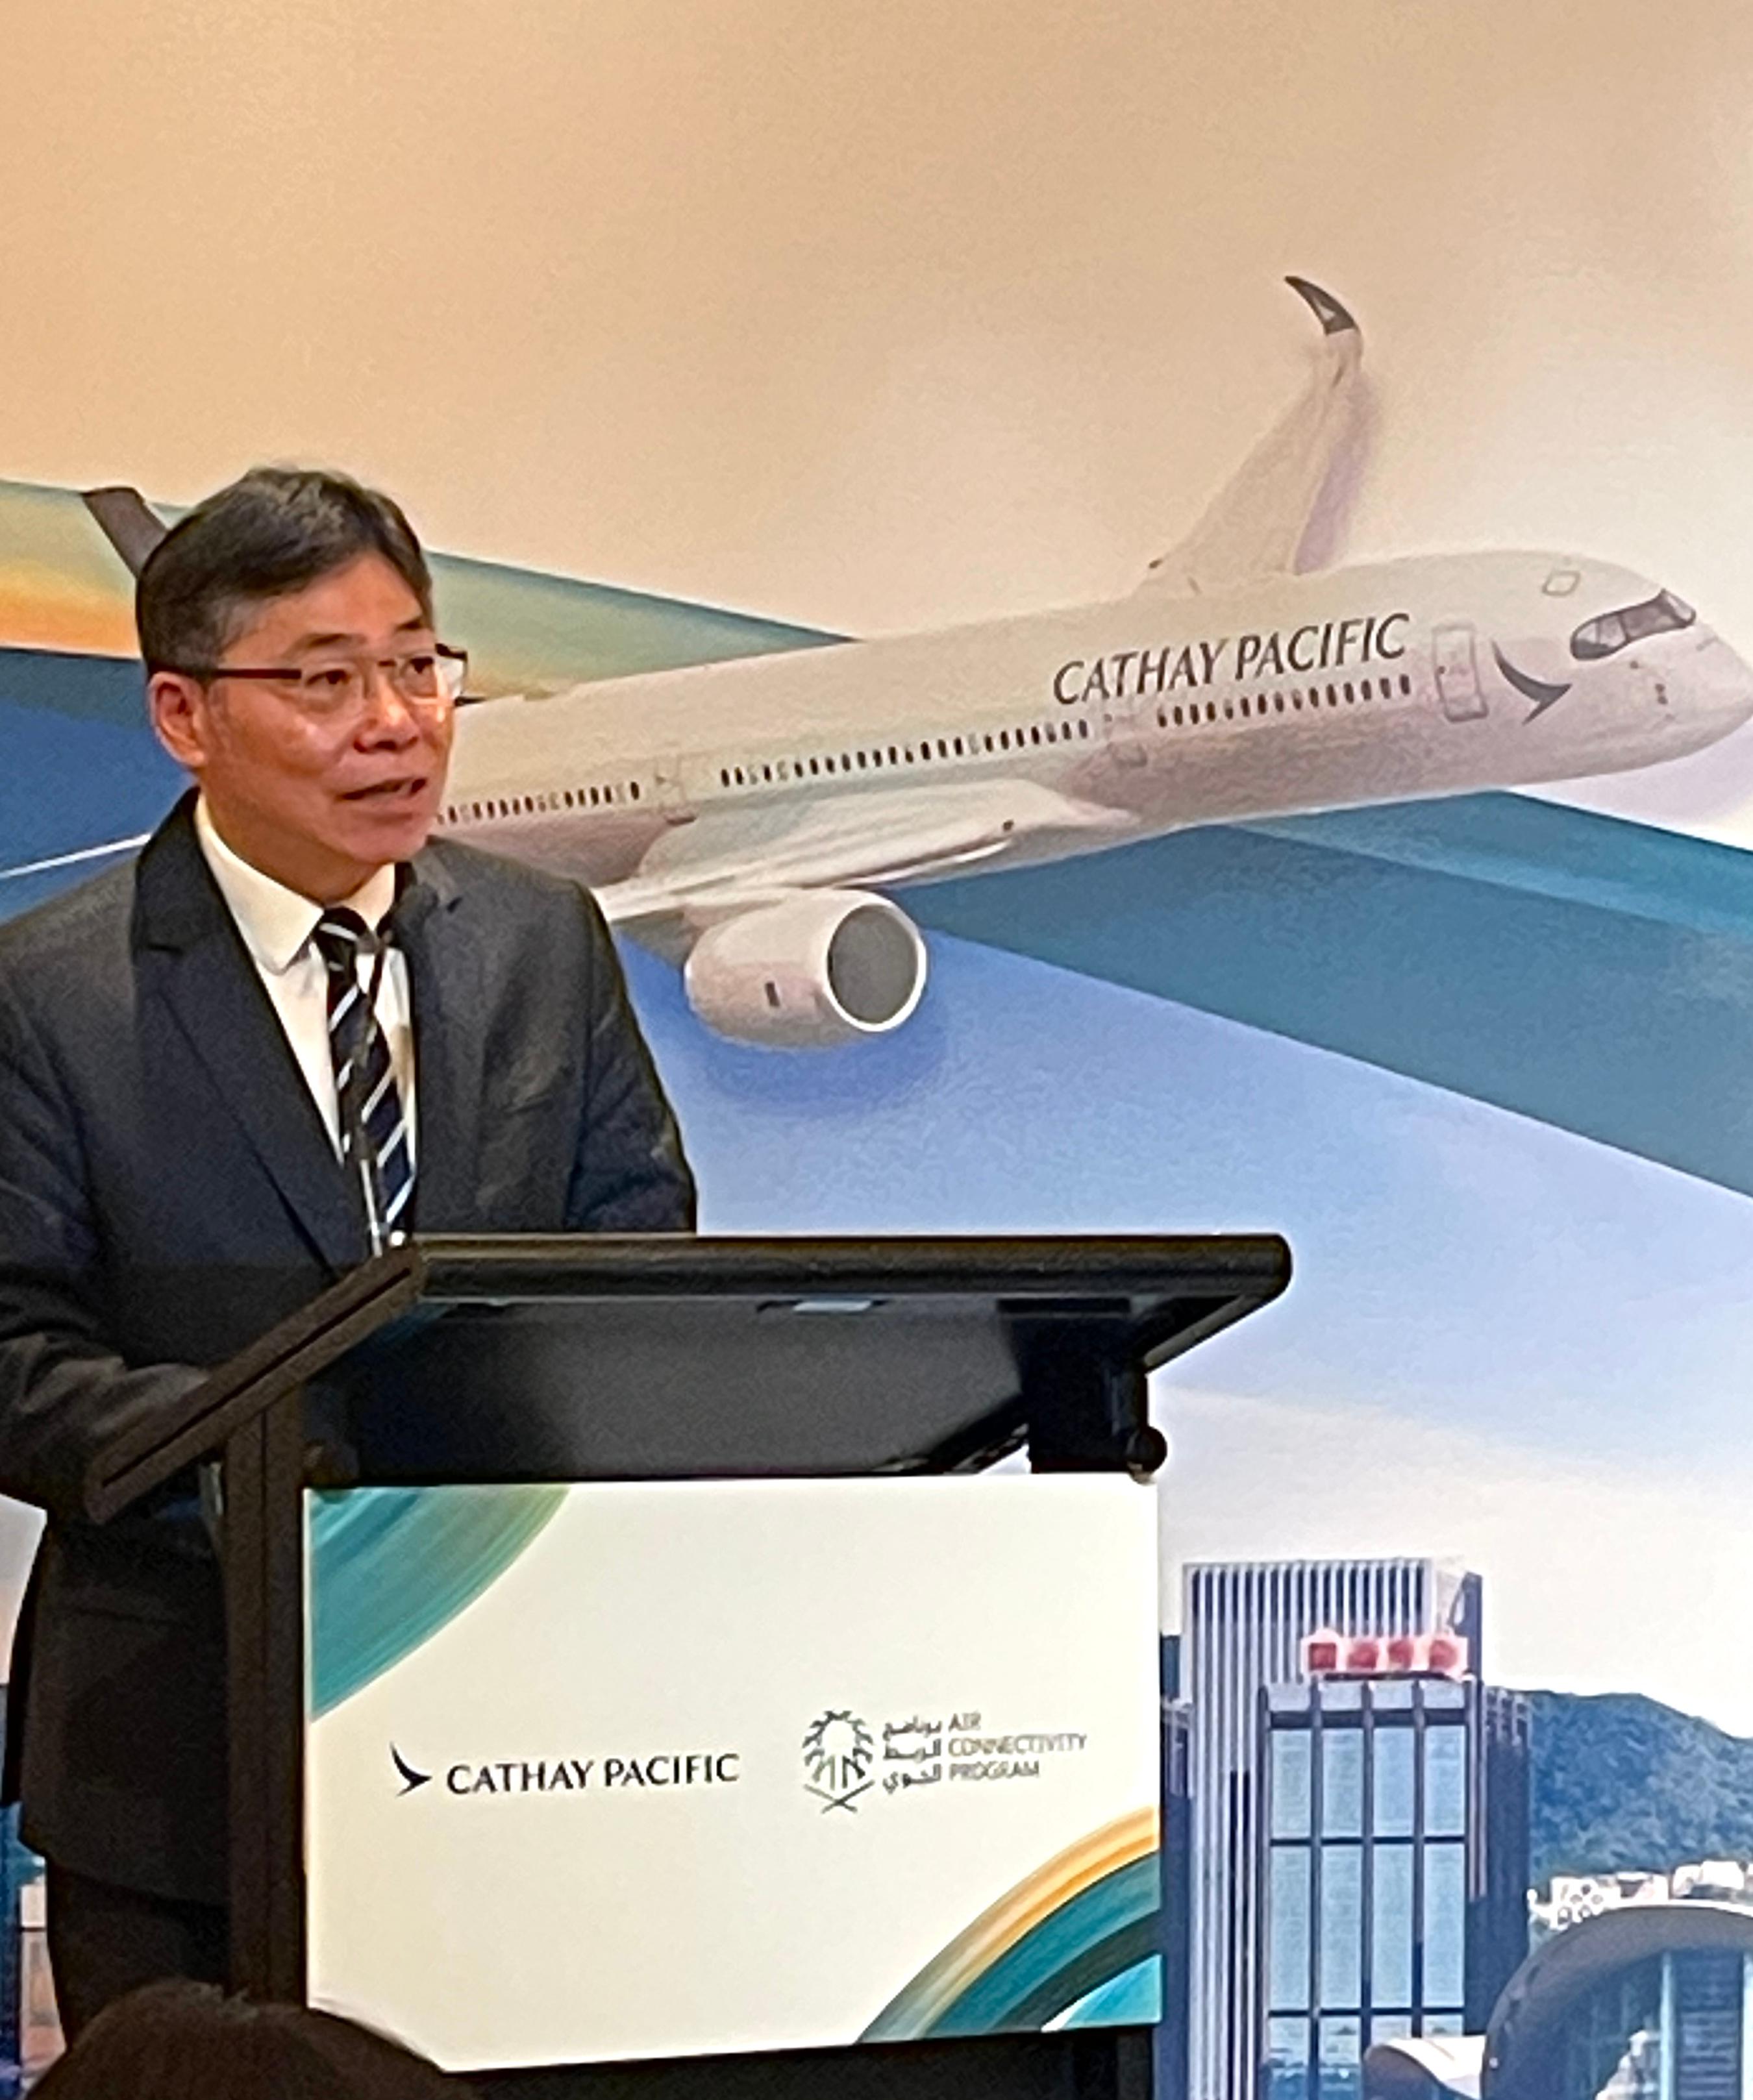 The Secretary for Transport and Logistics, Mr Lam Sai-hung, speaks at the Saudi Air Connectivity Program and Cathay Pacific Route Launch Signing Ceremony today (June 6).